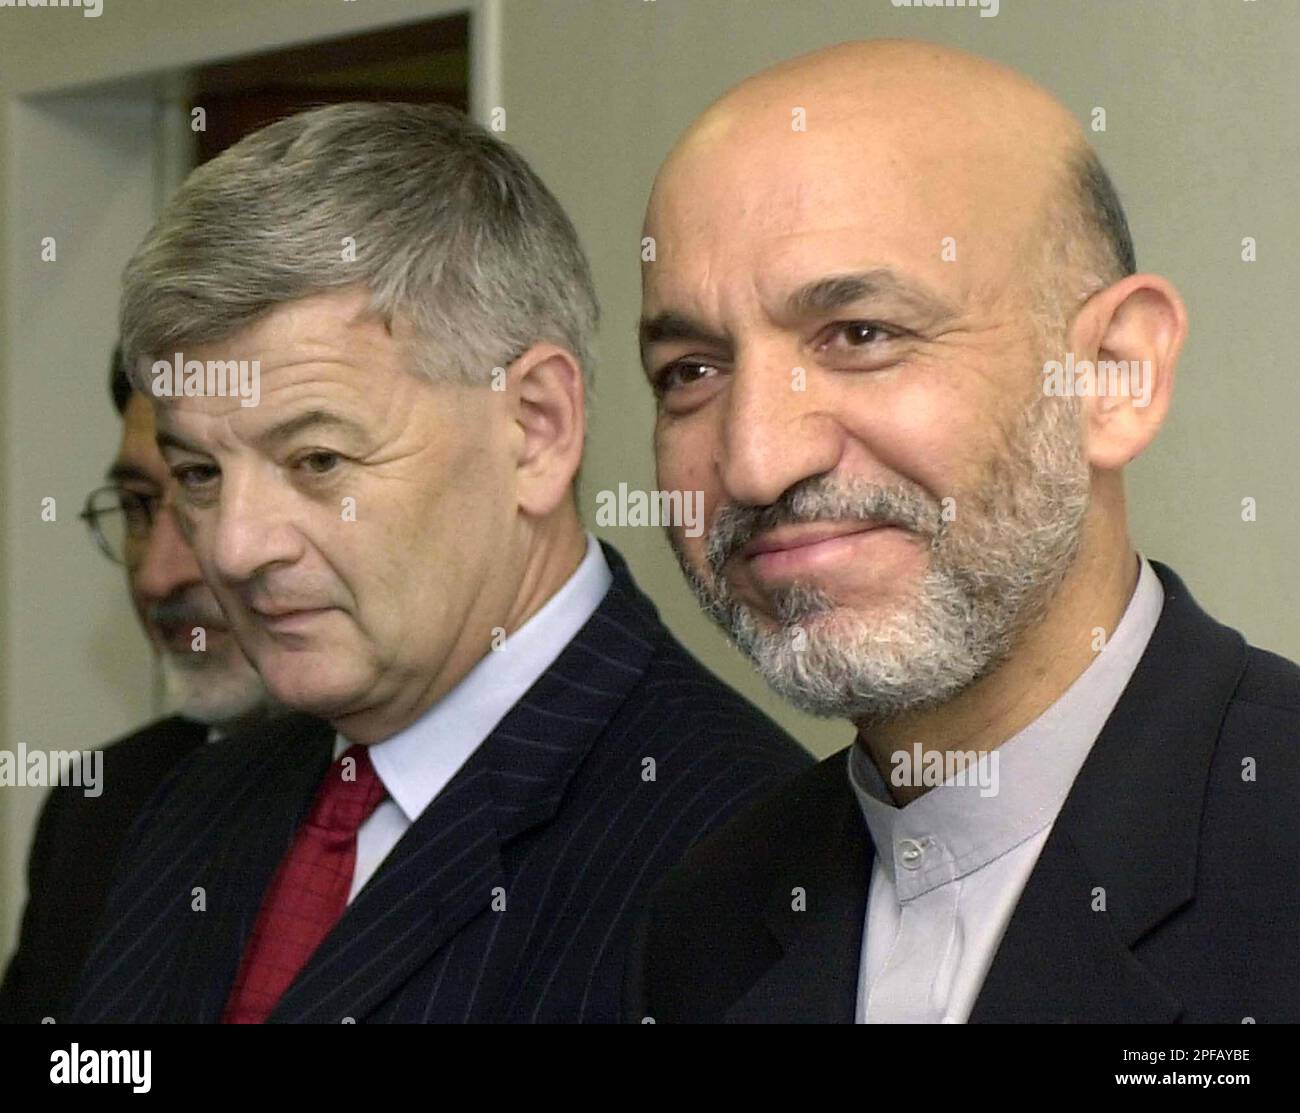 Afghan President Hamid Karzai, right, smiles after he was welcomed by German Foreign Minister Joschka Fischer, left, after he arrived at the U.S. Rhein Main Air Base, at the southern end of Frankfurt international airport, Germany, Sunday, Sept. 8, 2002. In his first trip since an attempt on his life three days ago, Karzai stopped over in Germany on his way to the United States where he will attend the U.N. General Assembly debate and ceremonies marking the anniversary of the Sept. 11 terrorist attacks. (AP Photo/Pool/Oliver Berg) Foto Stock